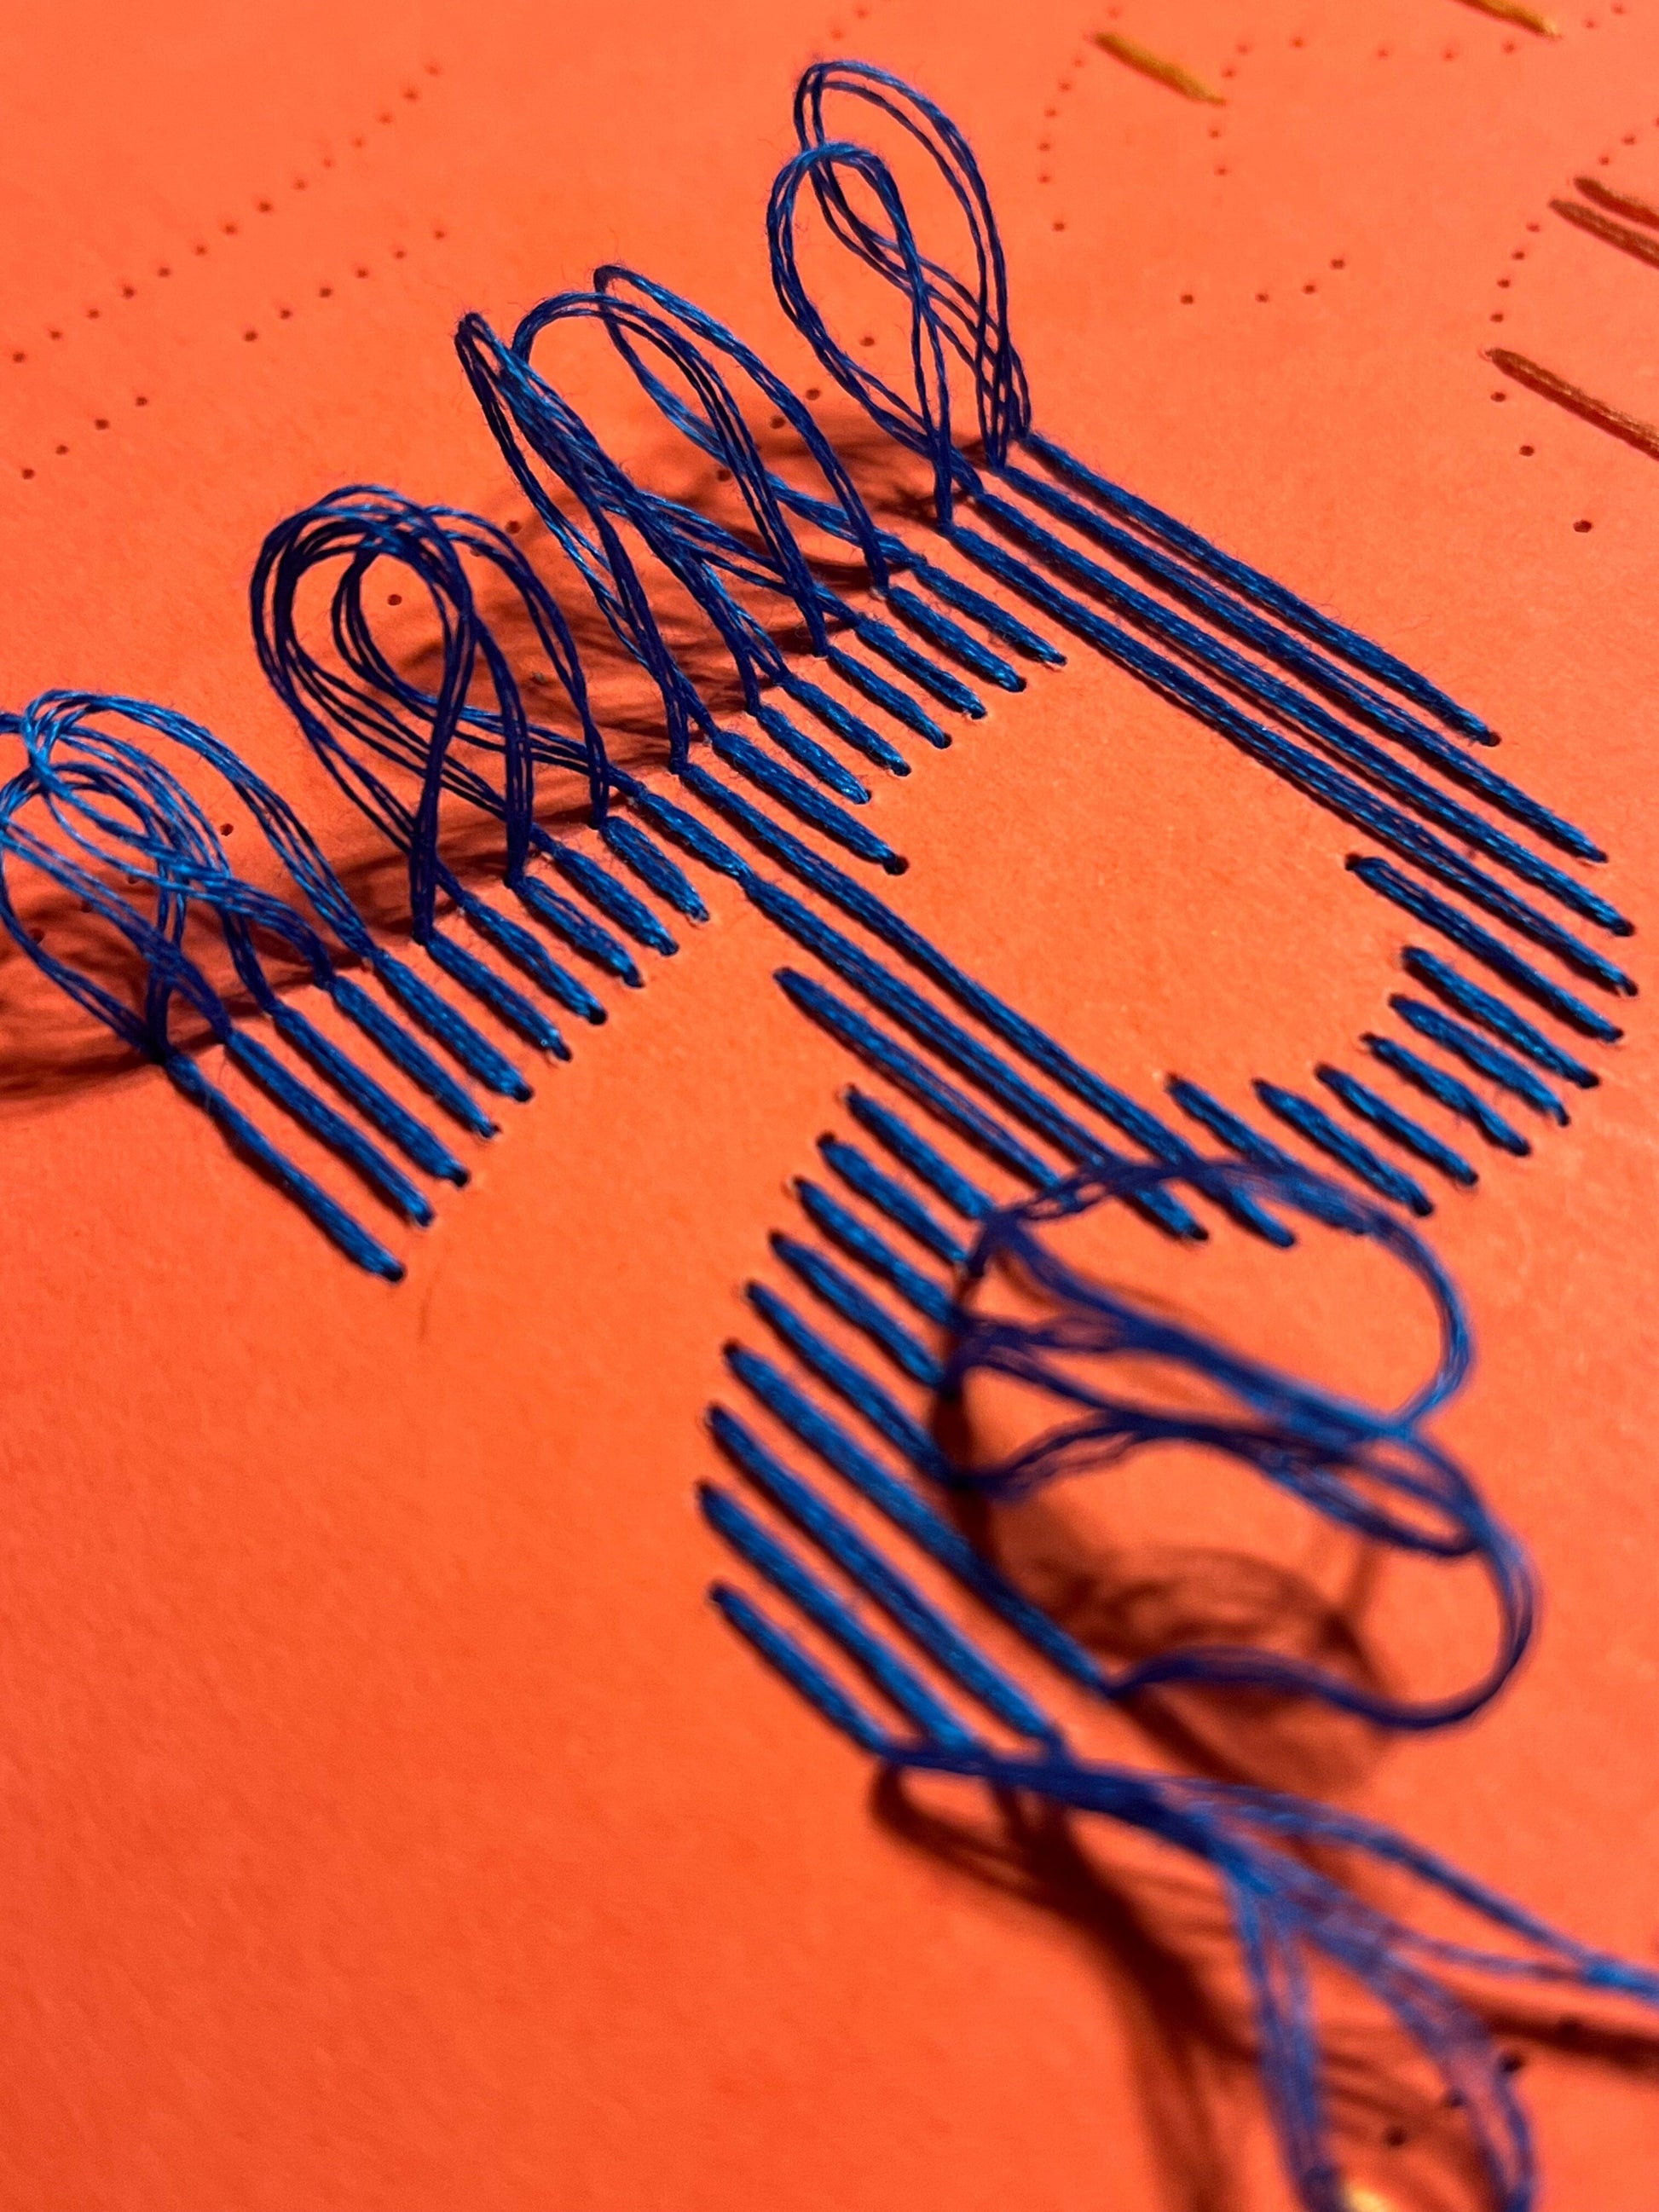 ONLINE: Embroidery + Typography Workshop 07/17 + 07/31 - Catalina Escallon